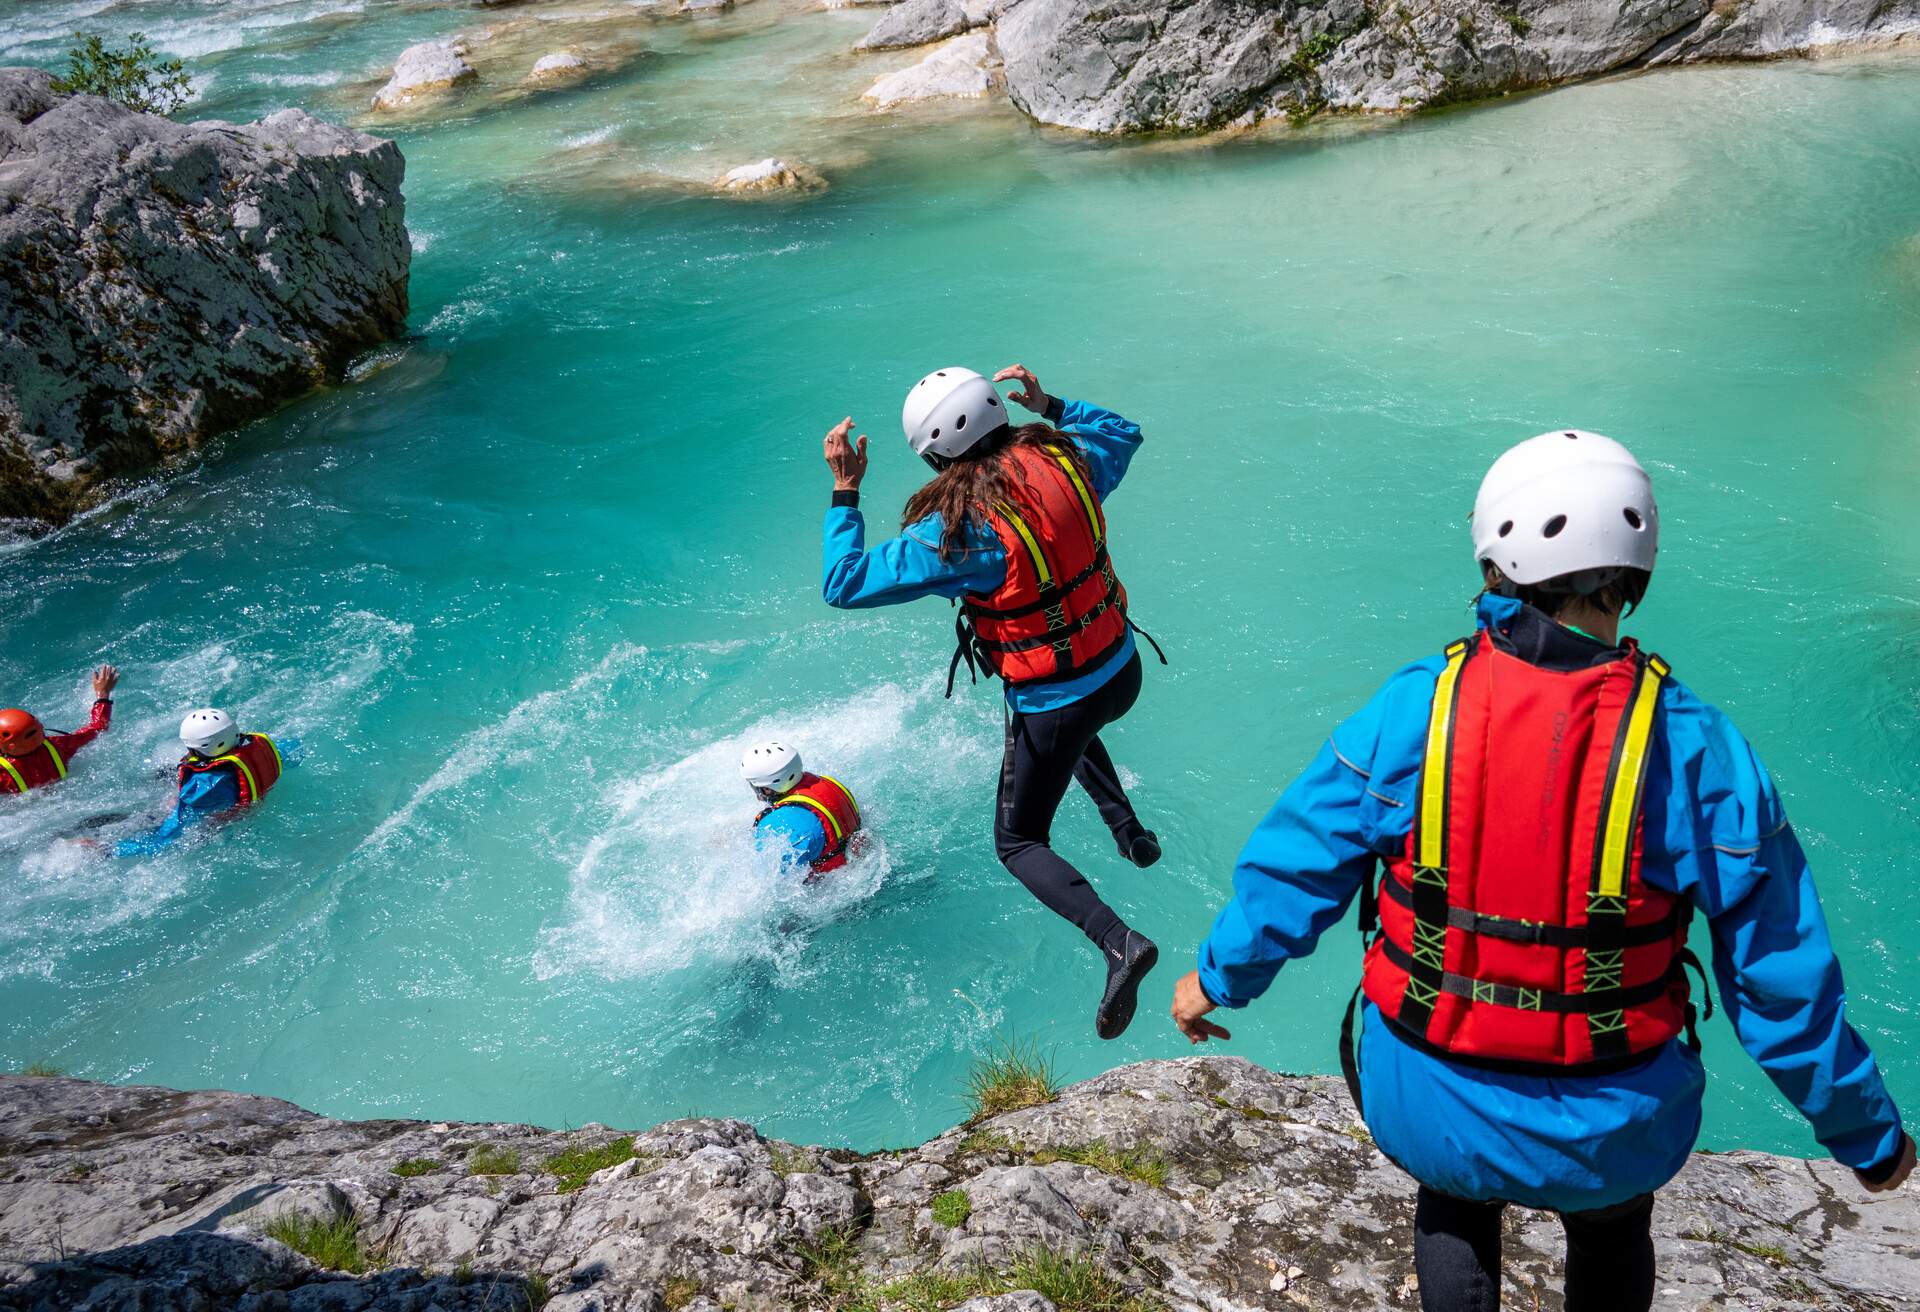 People in canyoning gear jumping one by one off a ledge into a river.